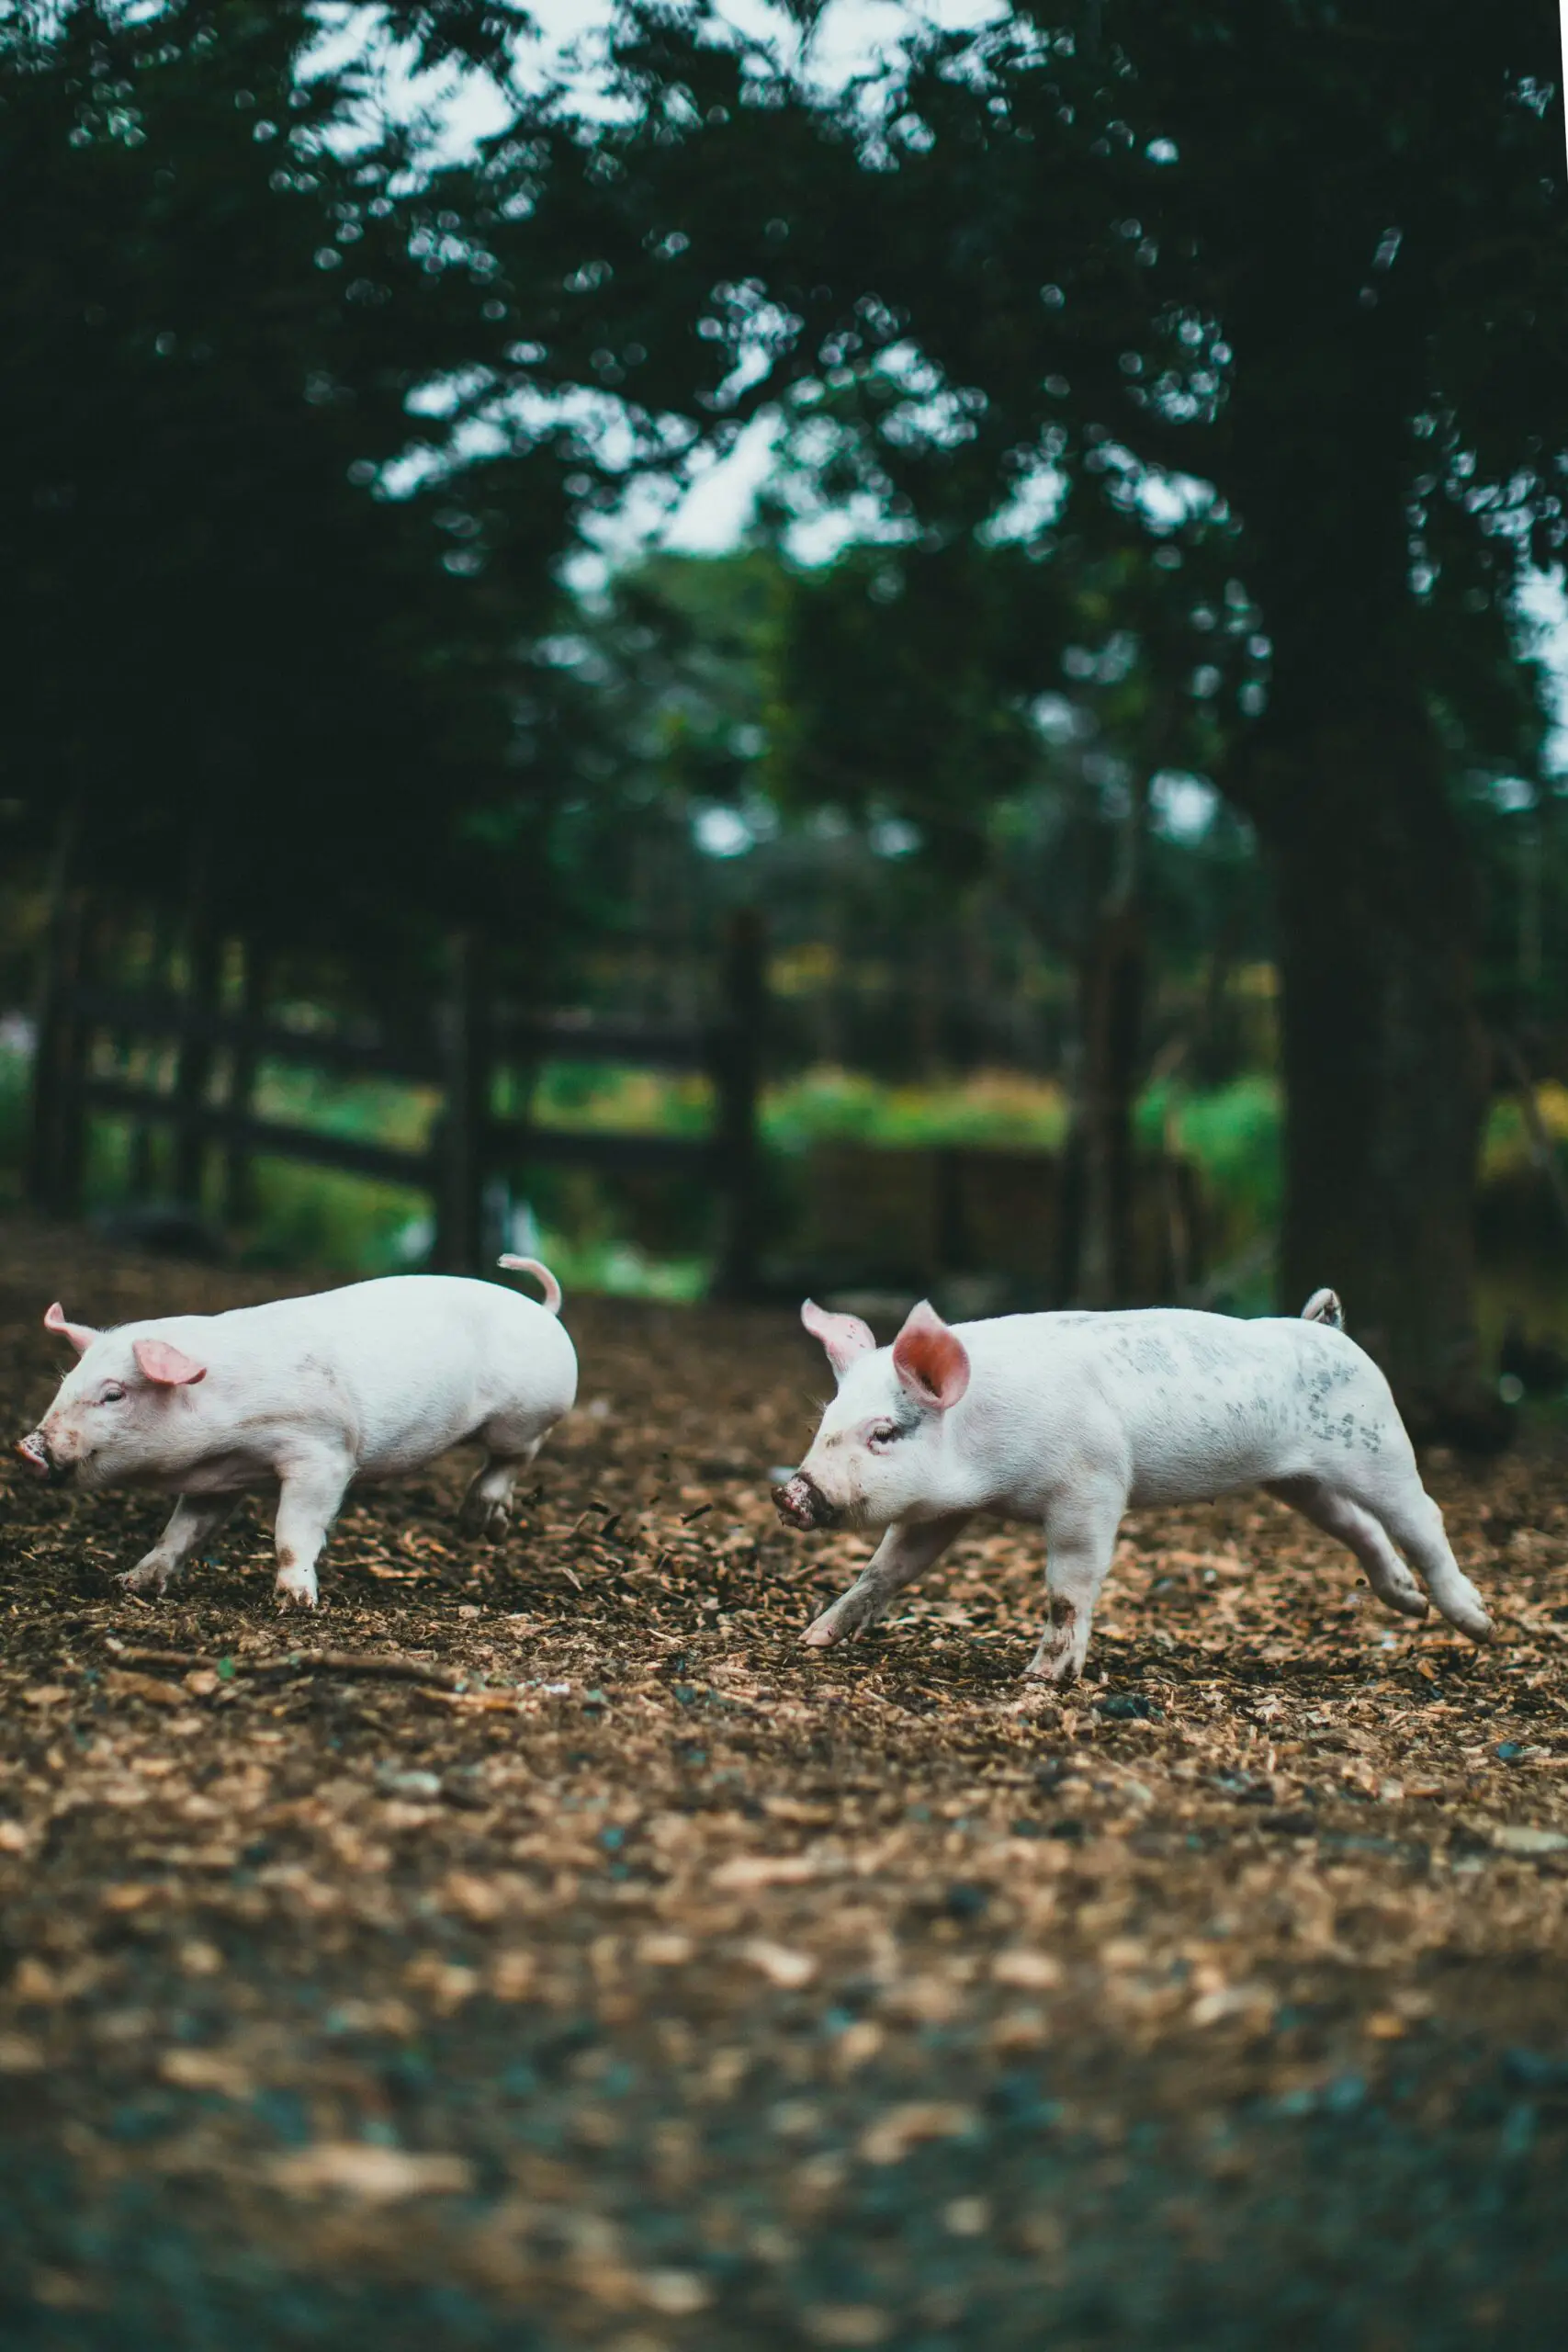 Are Pigs More Intelligent Than Dogs